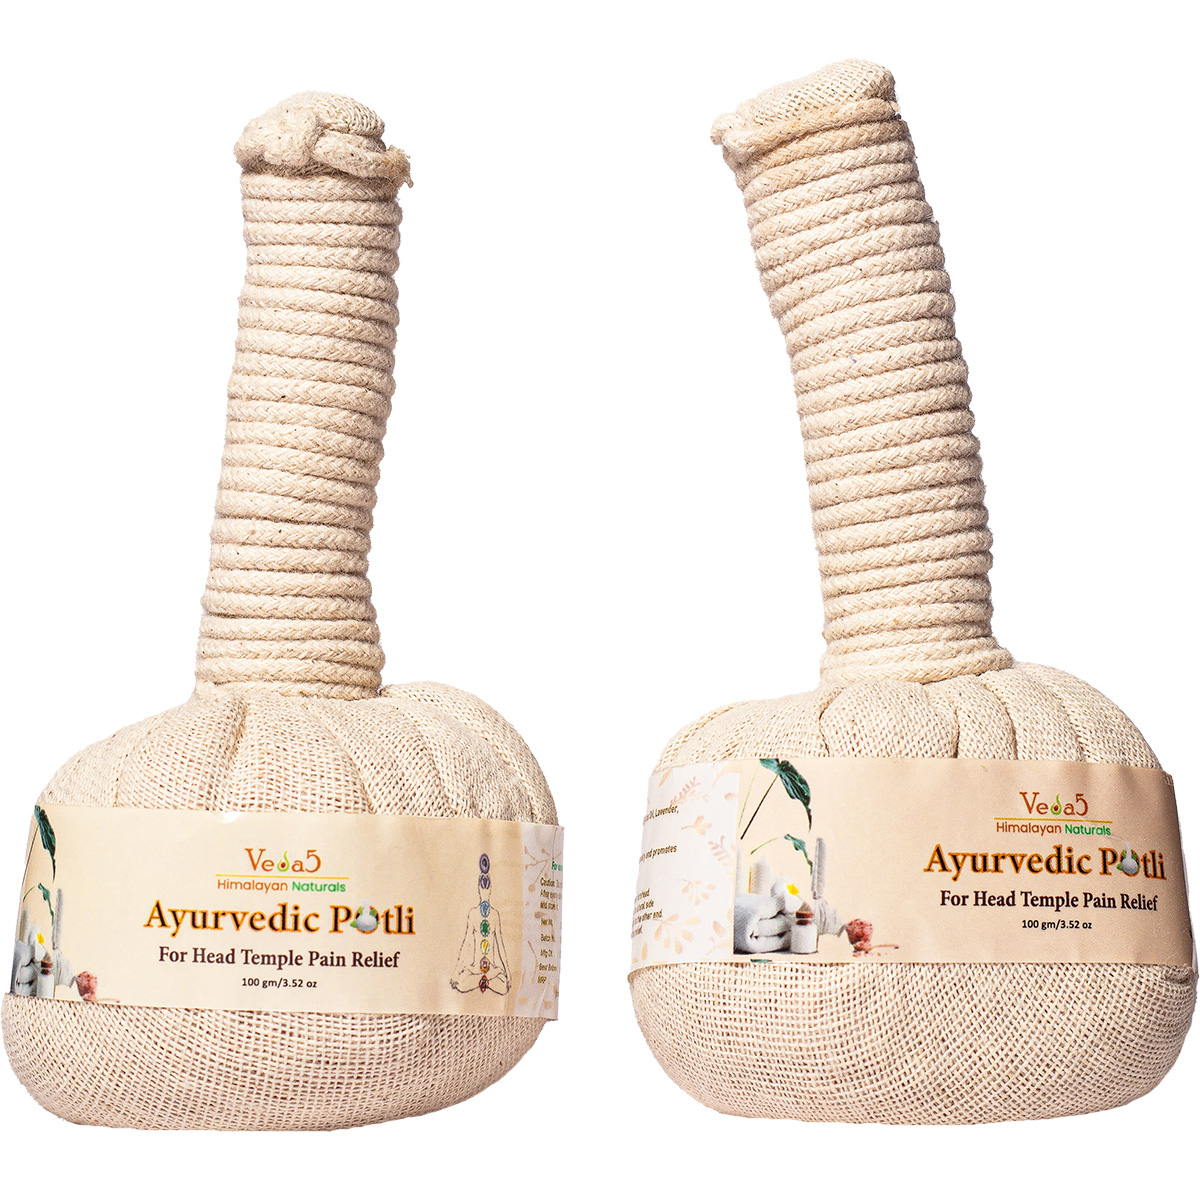 Ayurvedic Potli for Head Temple Pain Relief by Veda5 Himalayan Naturals 1